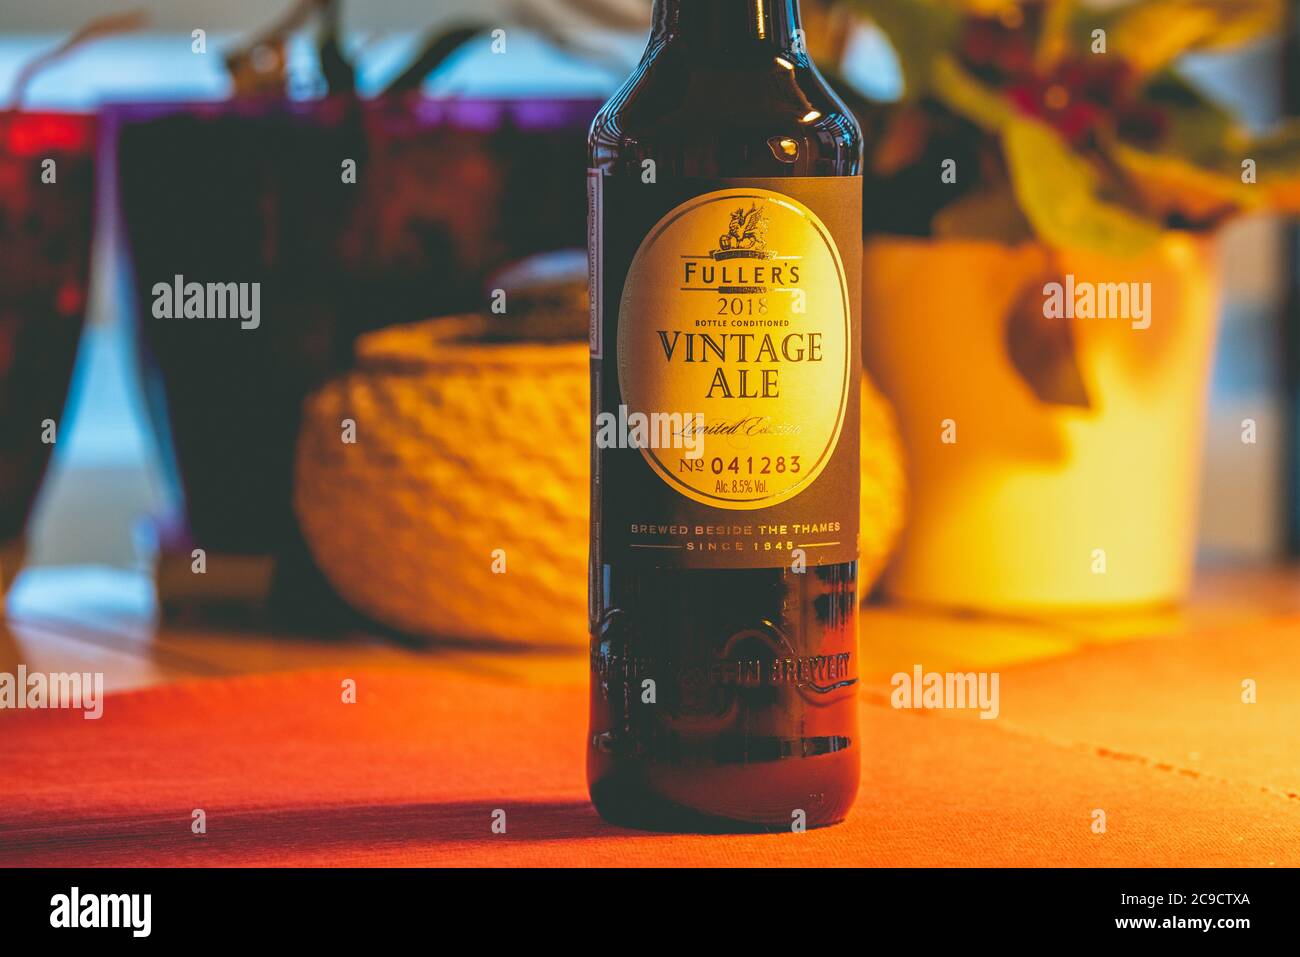 Ankara, TURKEY - January 1, 2020: A special beer by one of the most known British breweries, Fuller's Vintage Ale, is seeked all through the world. Stock Photo